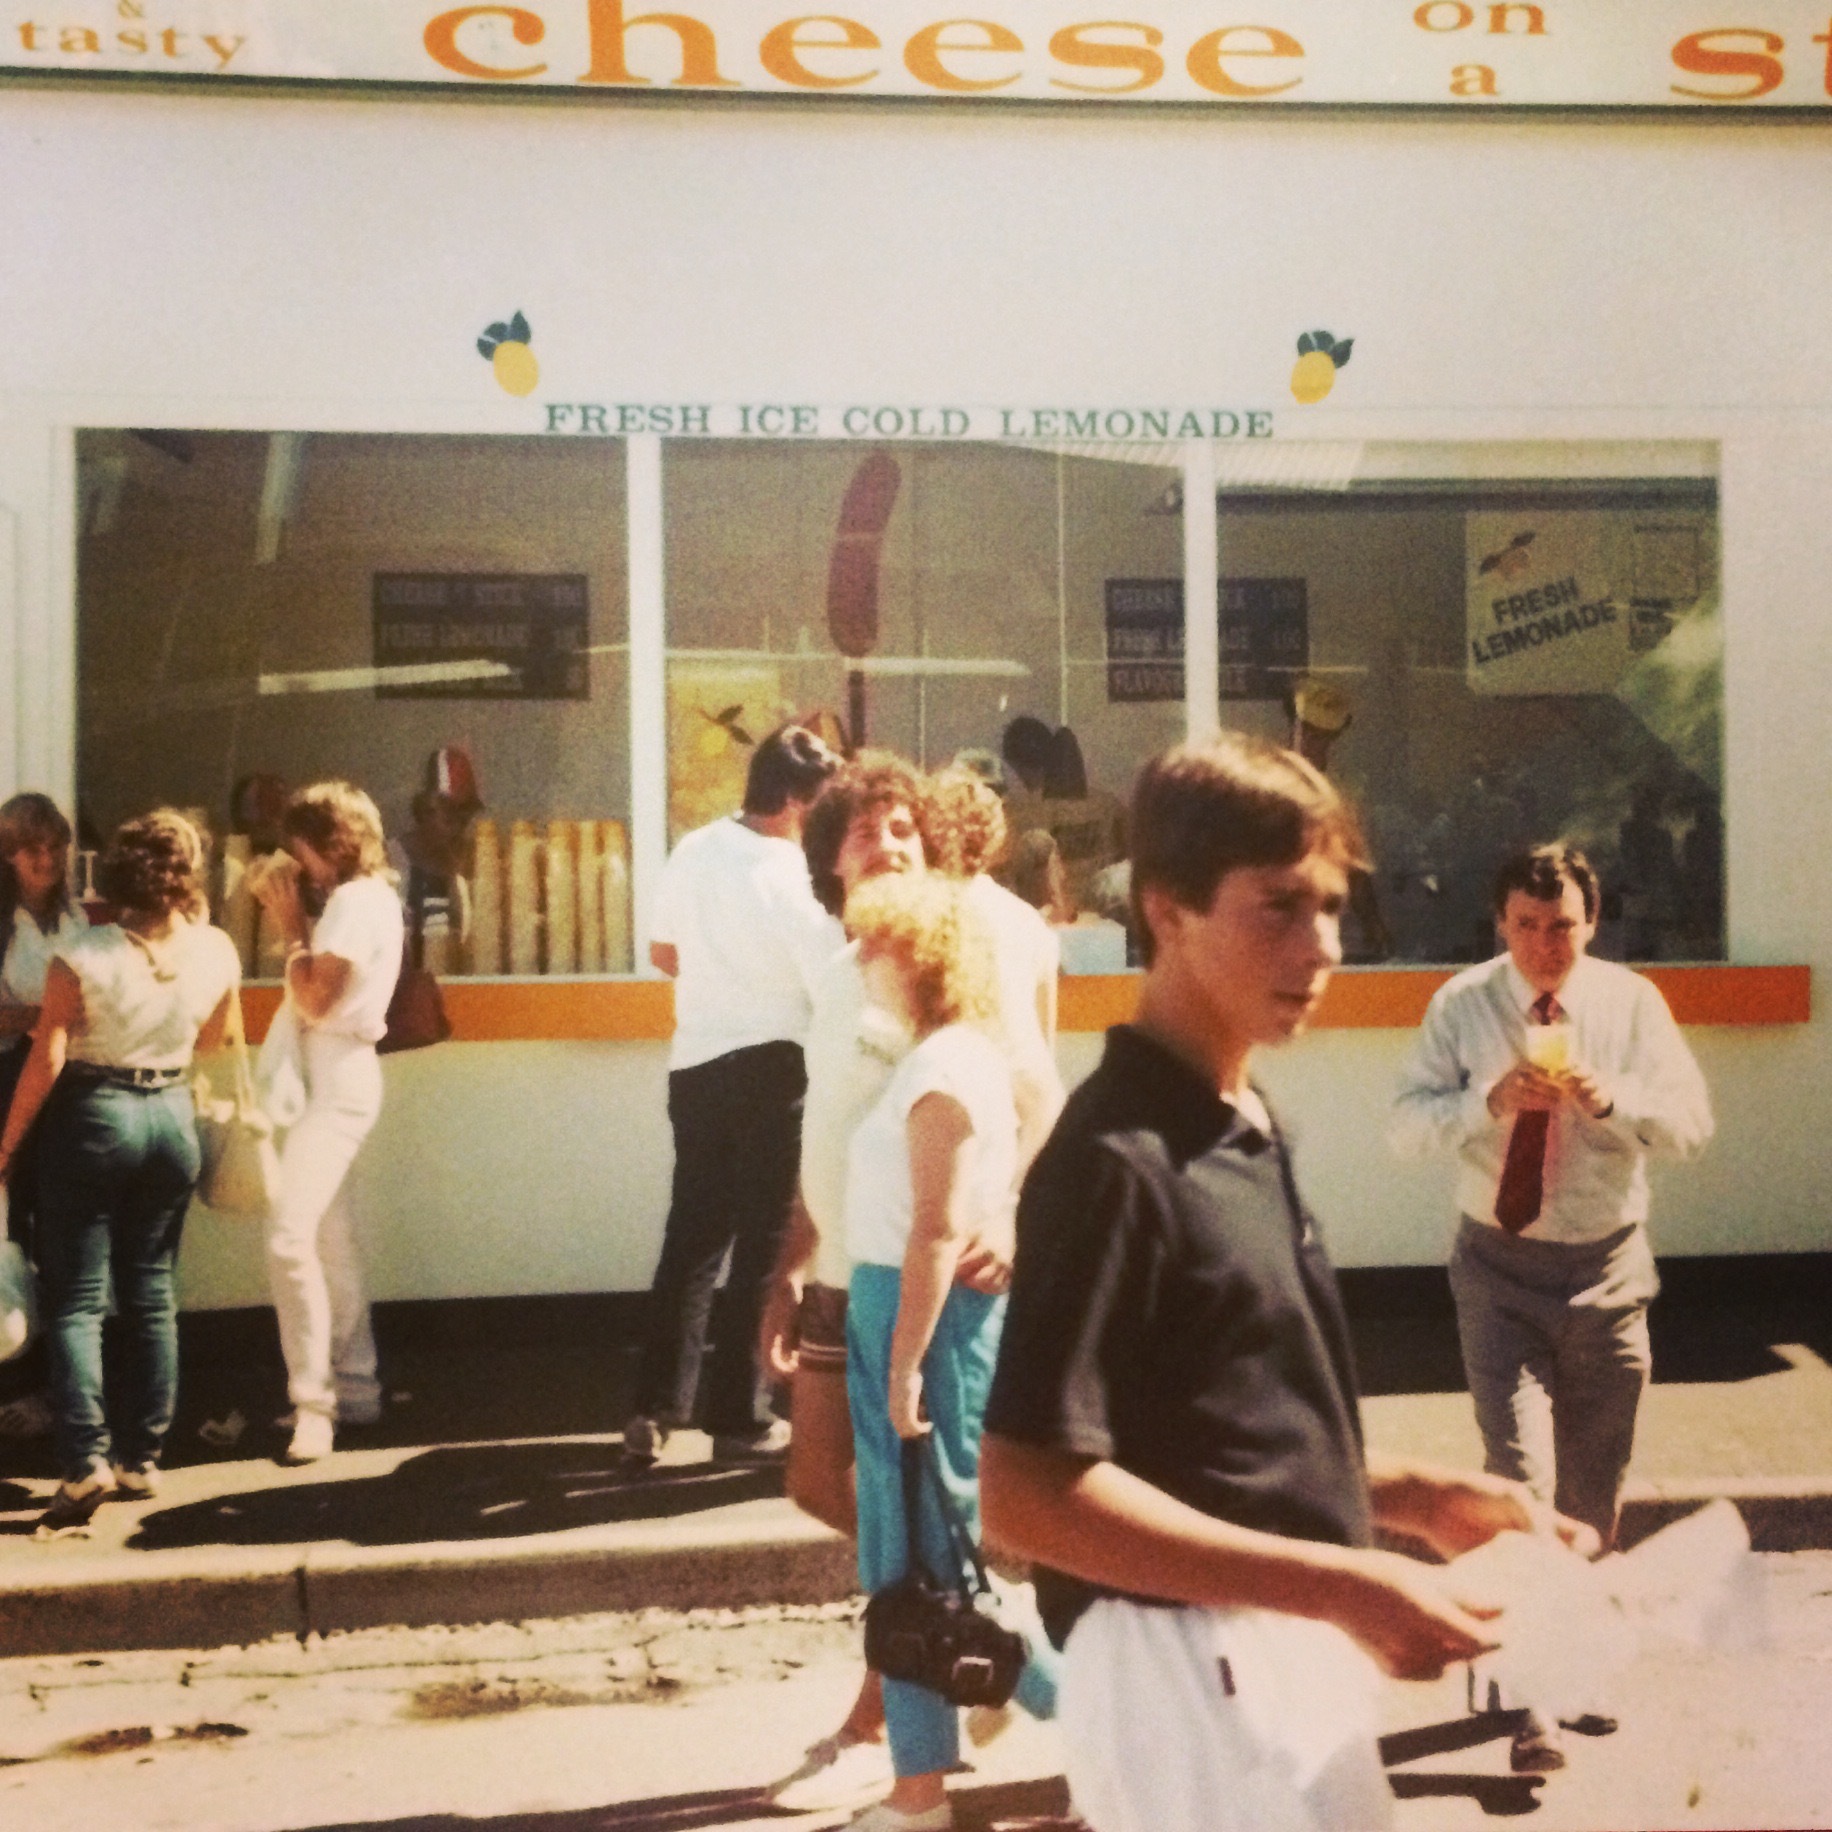 The first Cheese On A Stick store